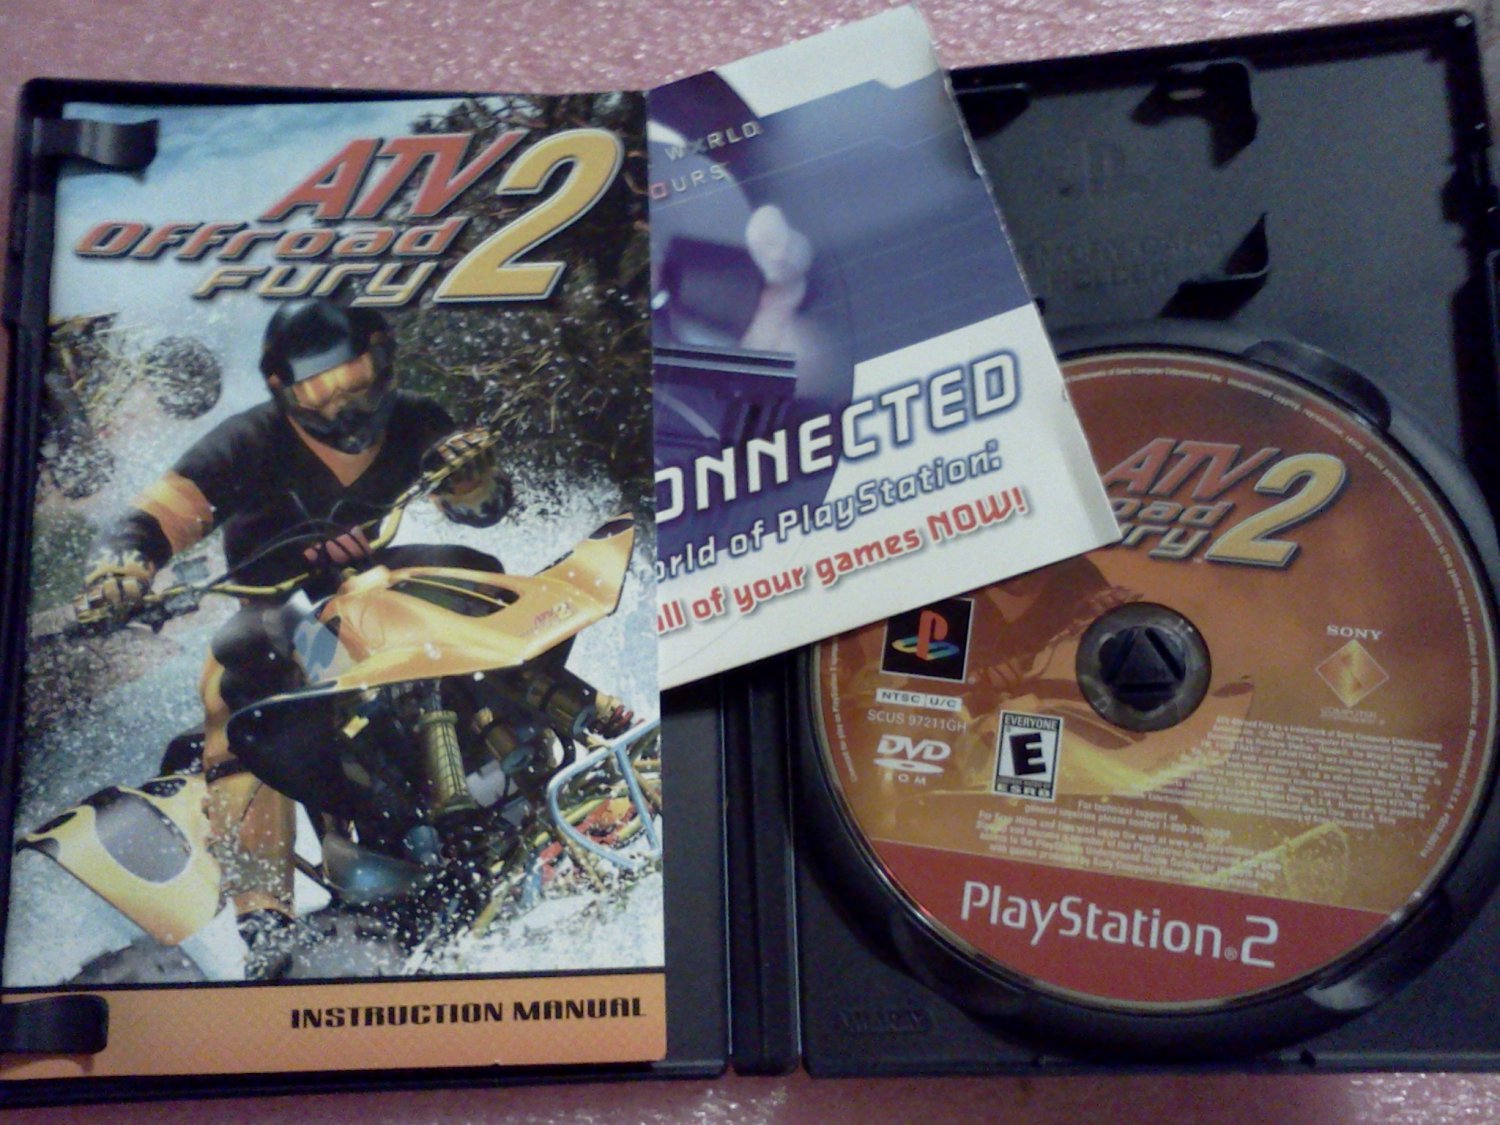 ps2 atv offroad fury 2 soundtrack picking up